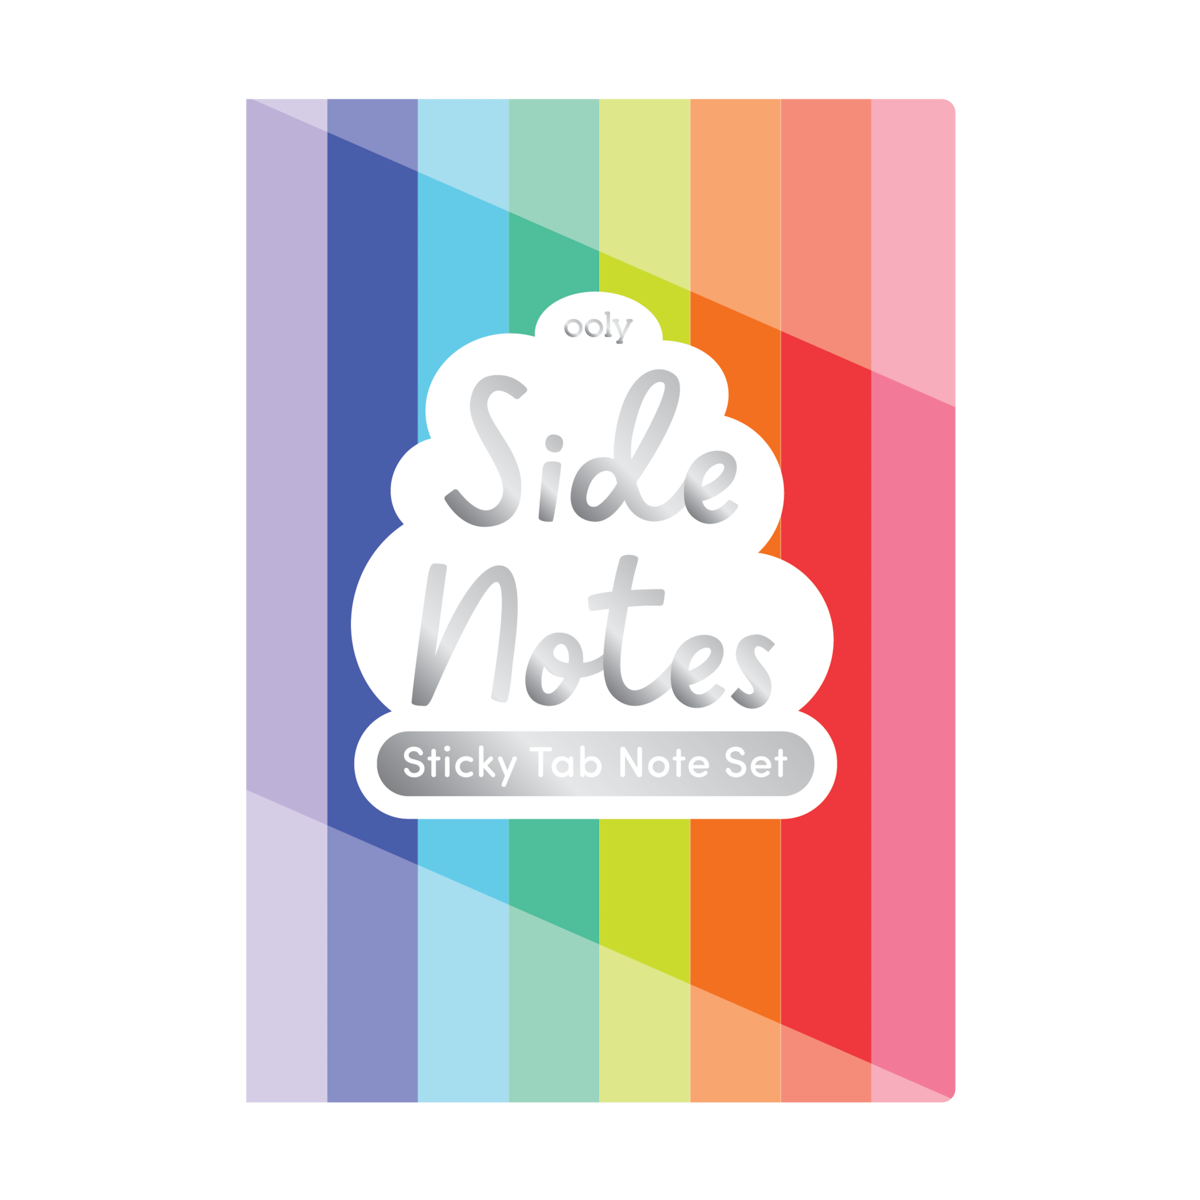 Note Pals Sticky Tabs: Cute Doodle World – Bicycle Pie